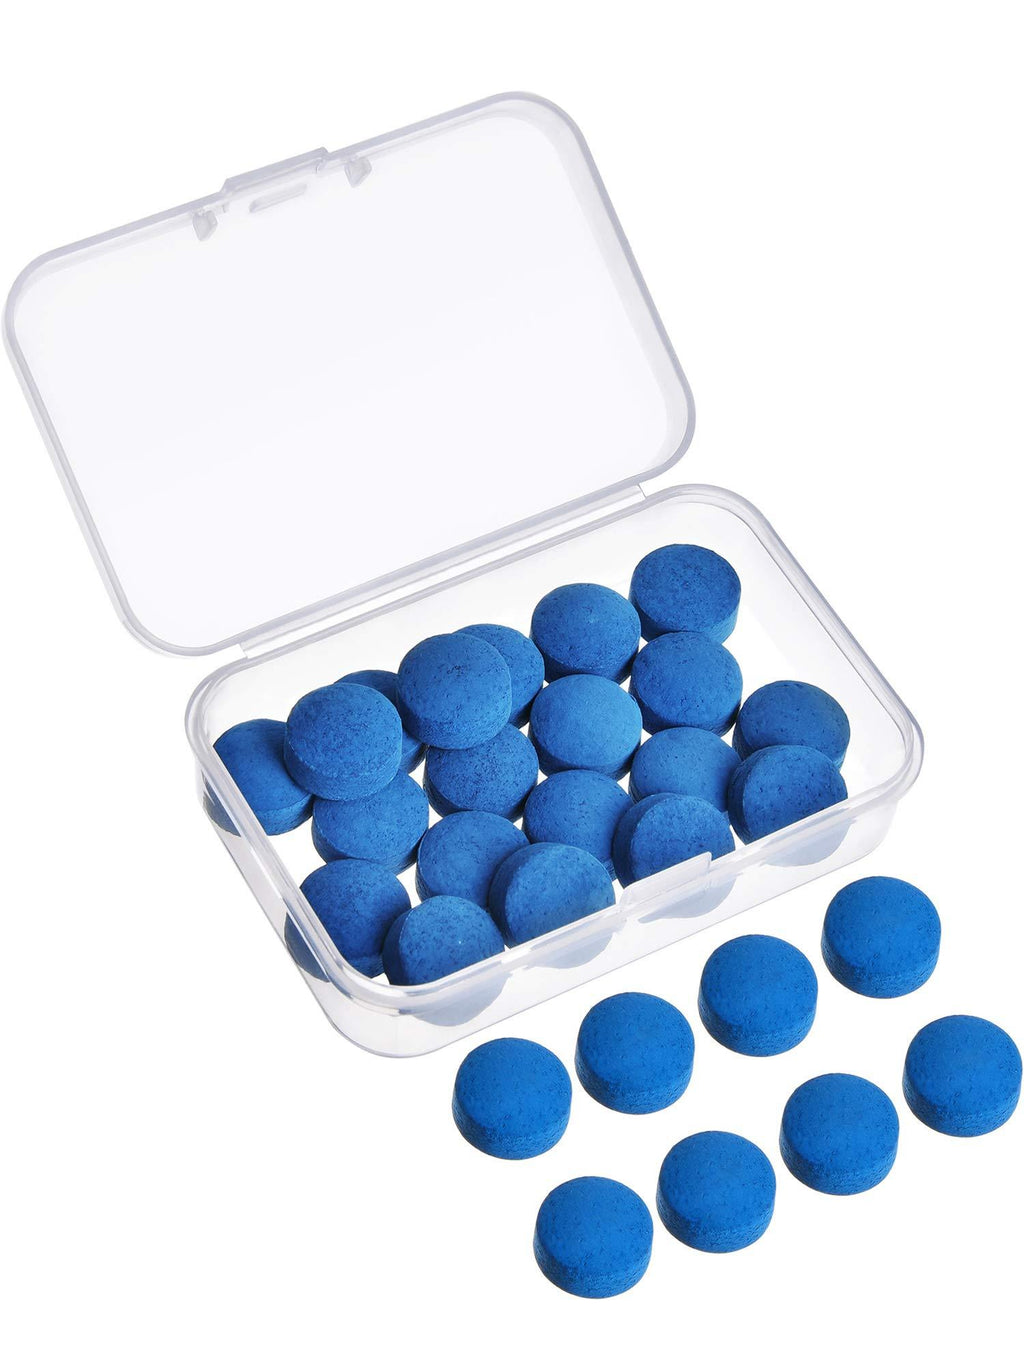 [AUSTRALIA] - Jetec 30 Pieces Billiard Pool Cue Tips Cue Pool Stick Replacement Tips with Storage Box for Billiard Pool Cues Supplies, 13 mm, Blue 